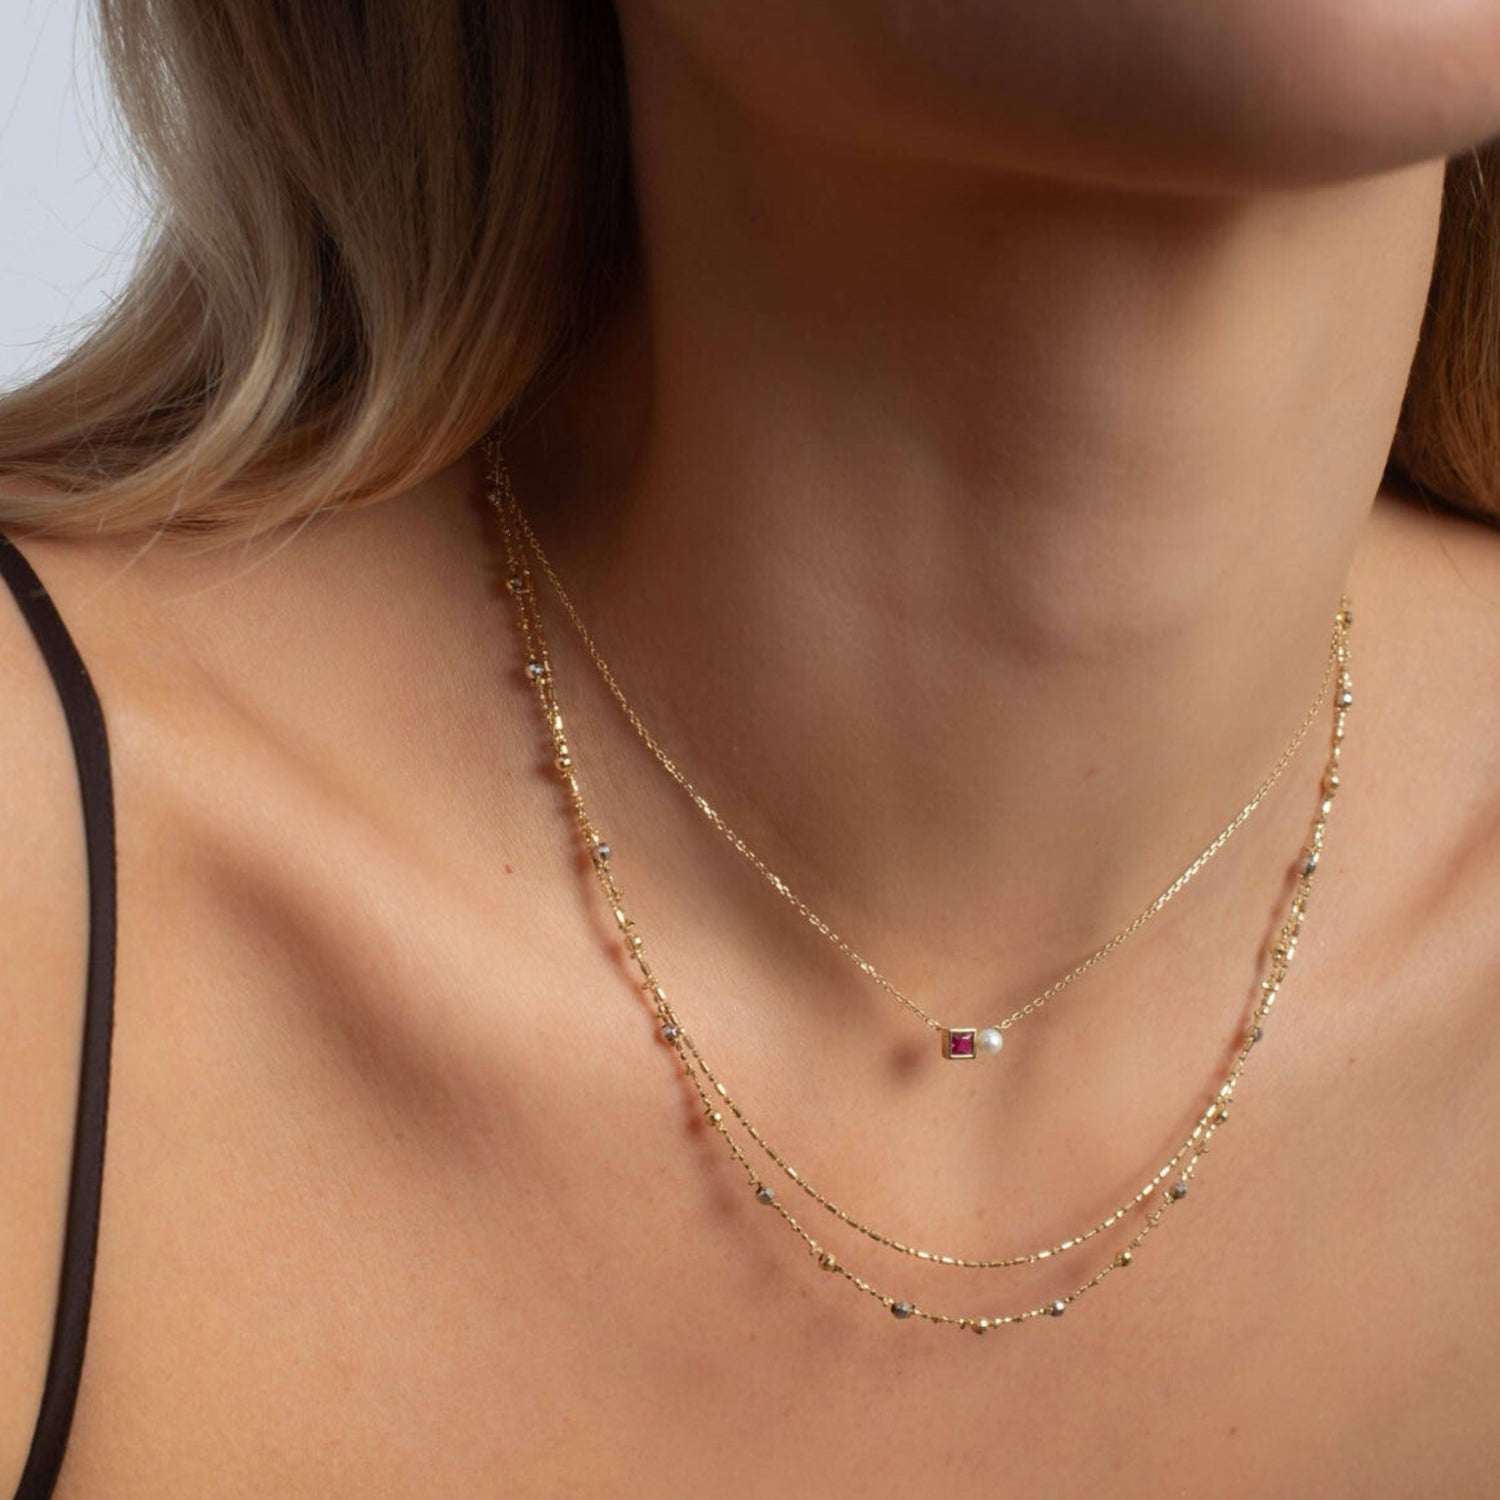 Bubble Necklace -  Solid Gold